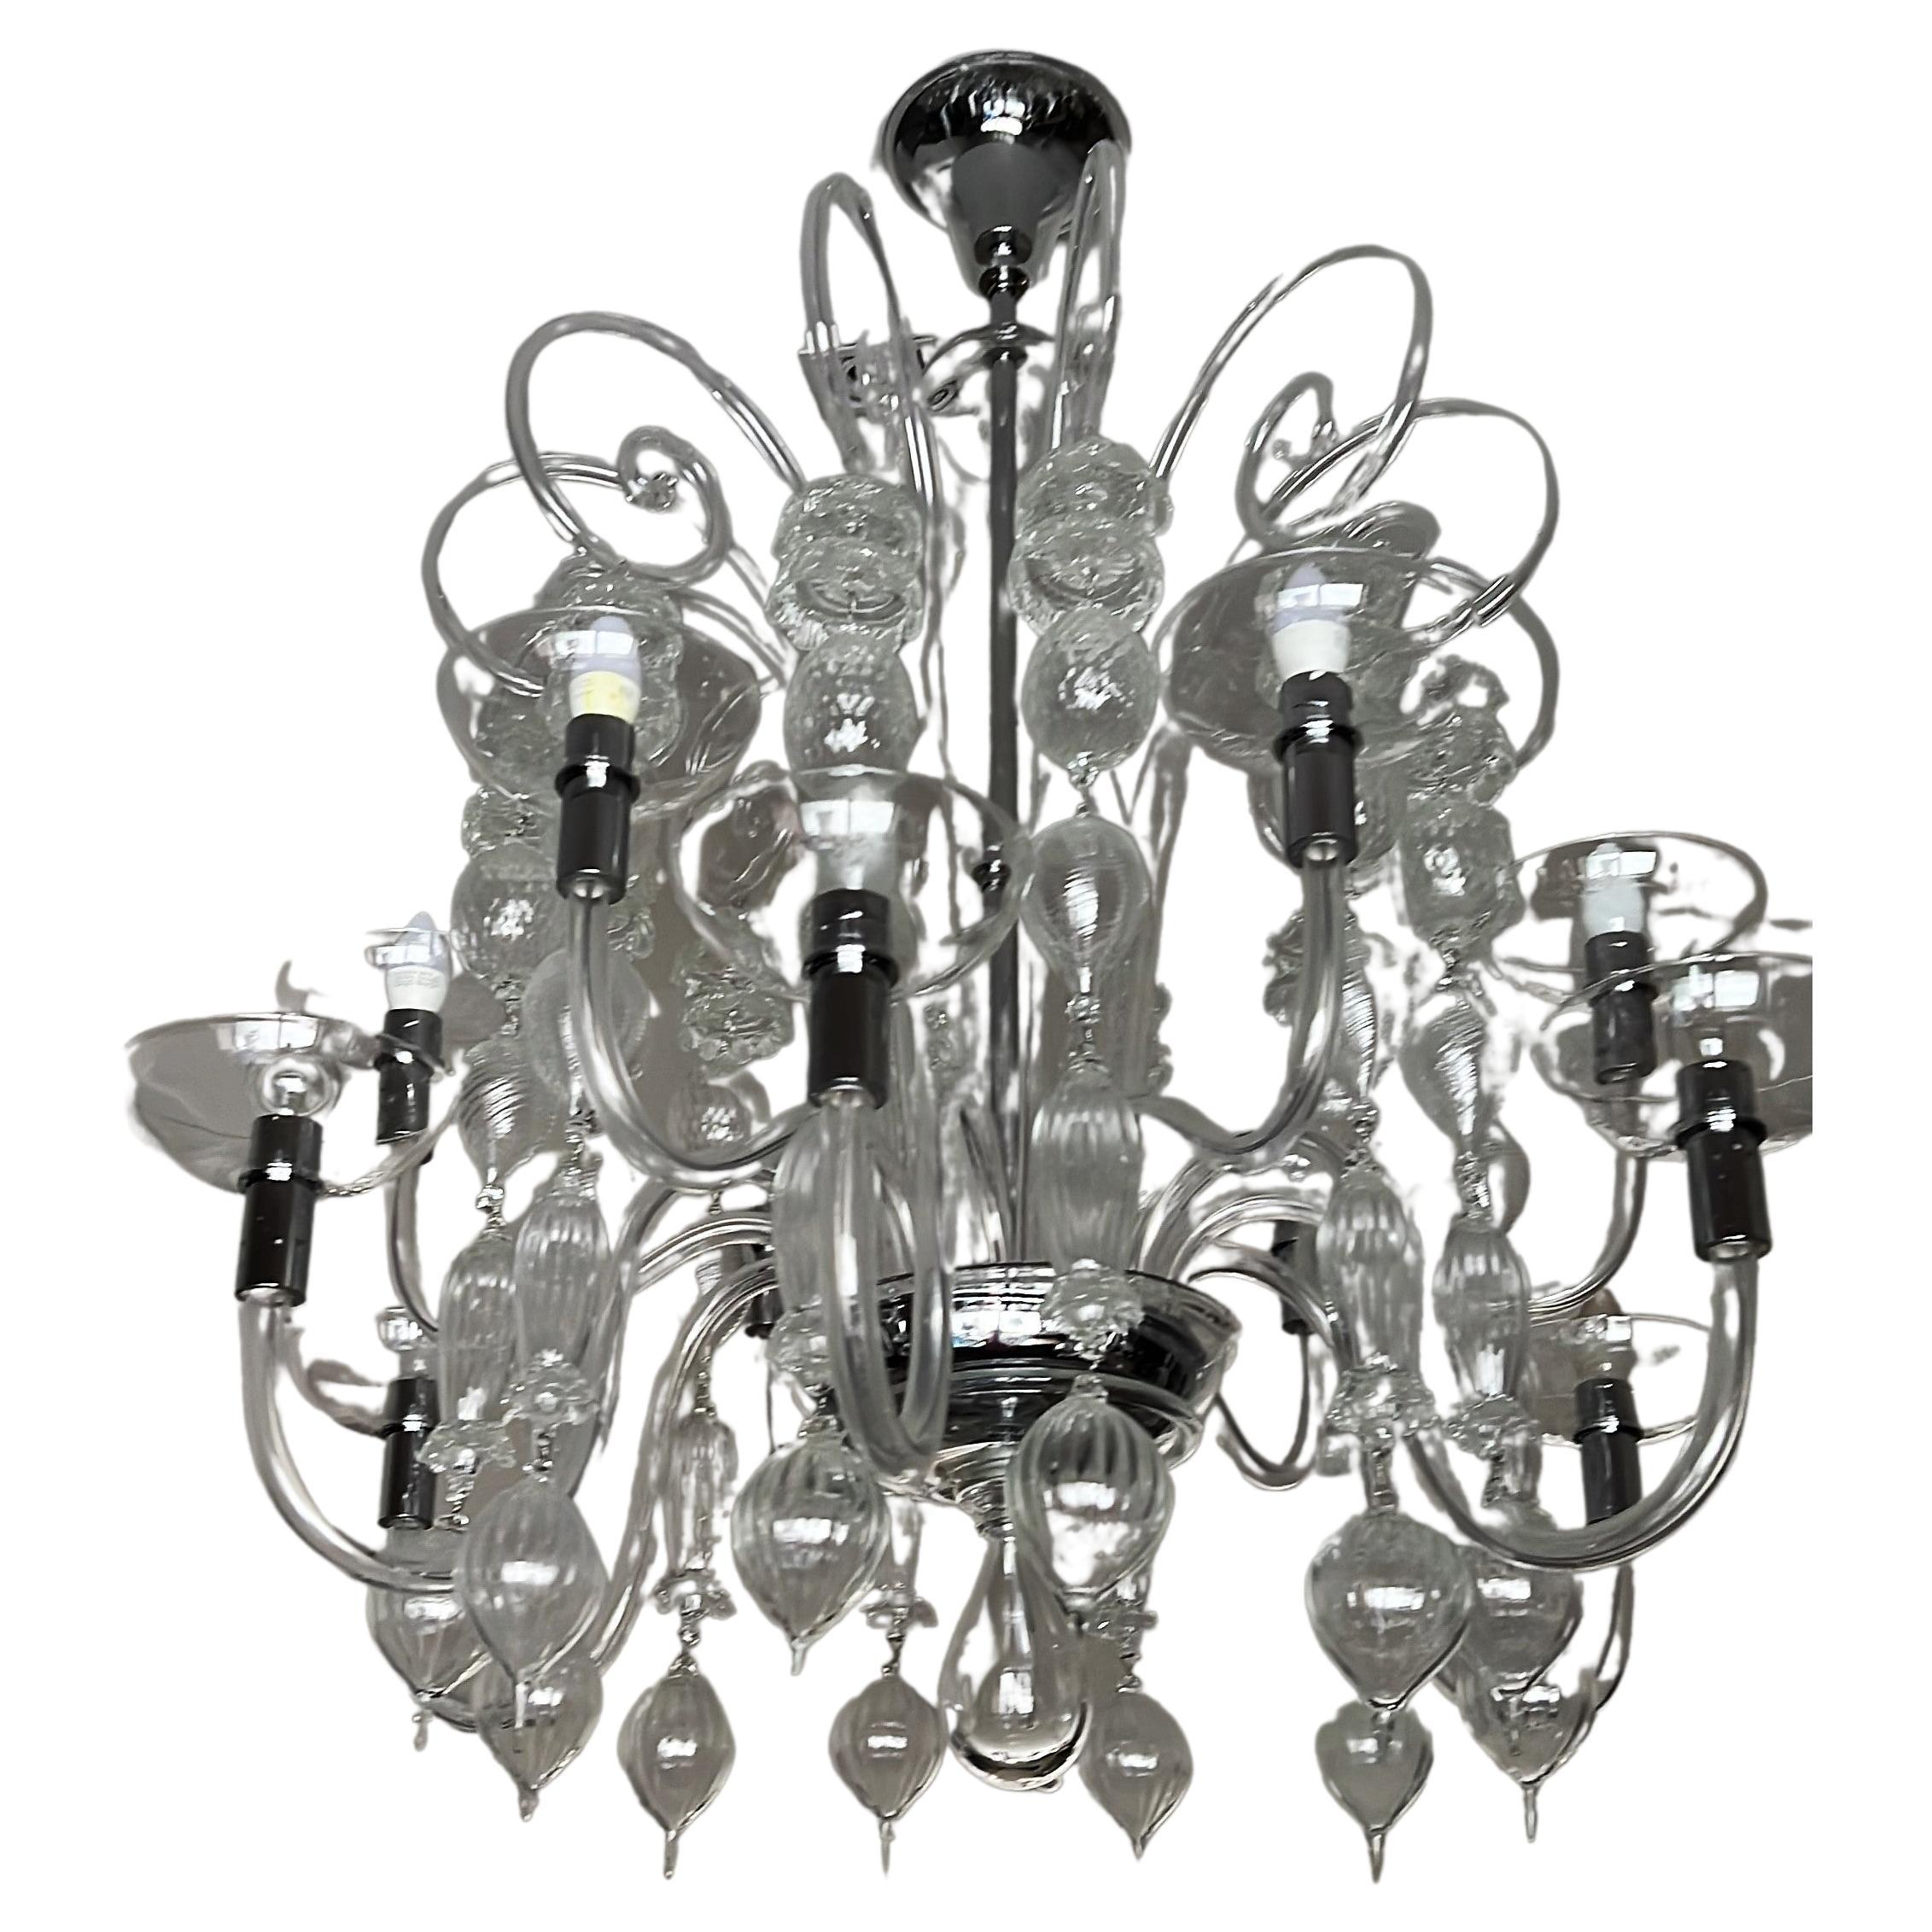 12 Light chandelier designed by Carlo Scarpa for Venini , Model 99.37 in Murano Italy.
This Chandelier originally designed in 1940 was manufactured in 2009. 
All the pieces are in great condition with no breaks.
Measures: 
Height is 43